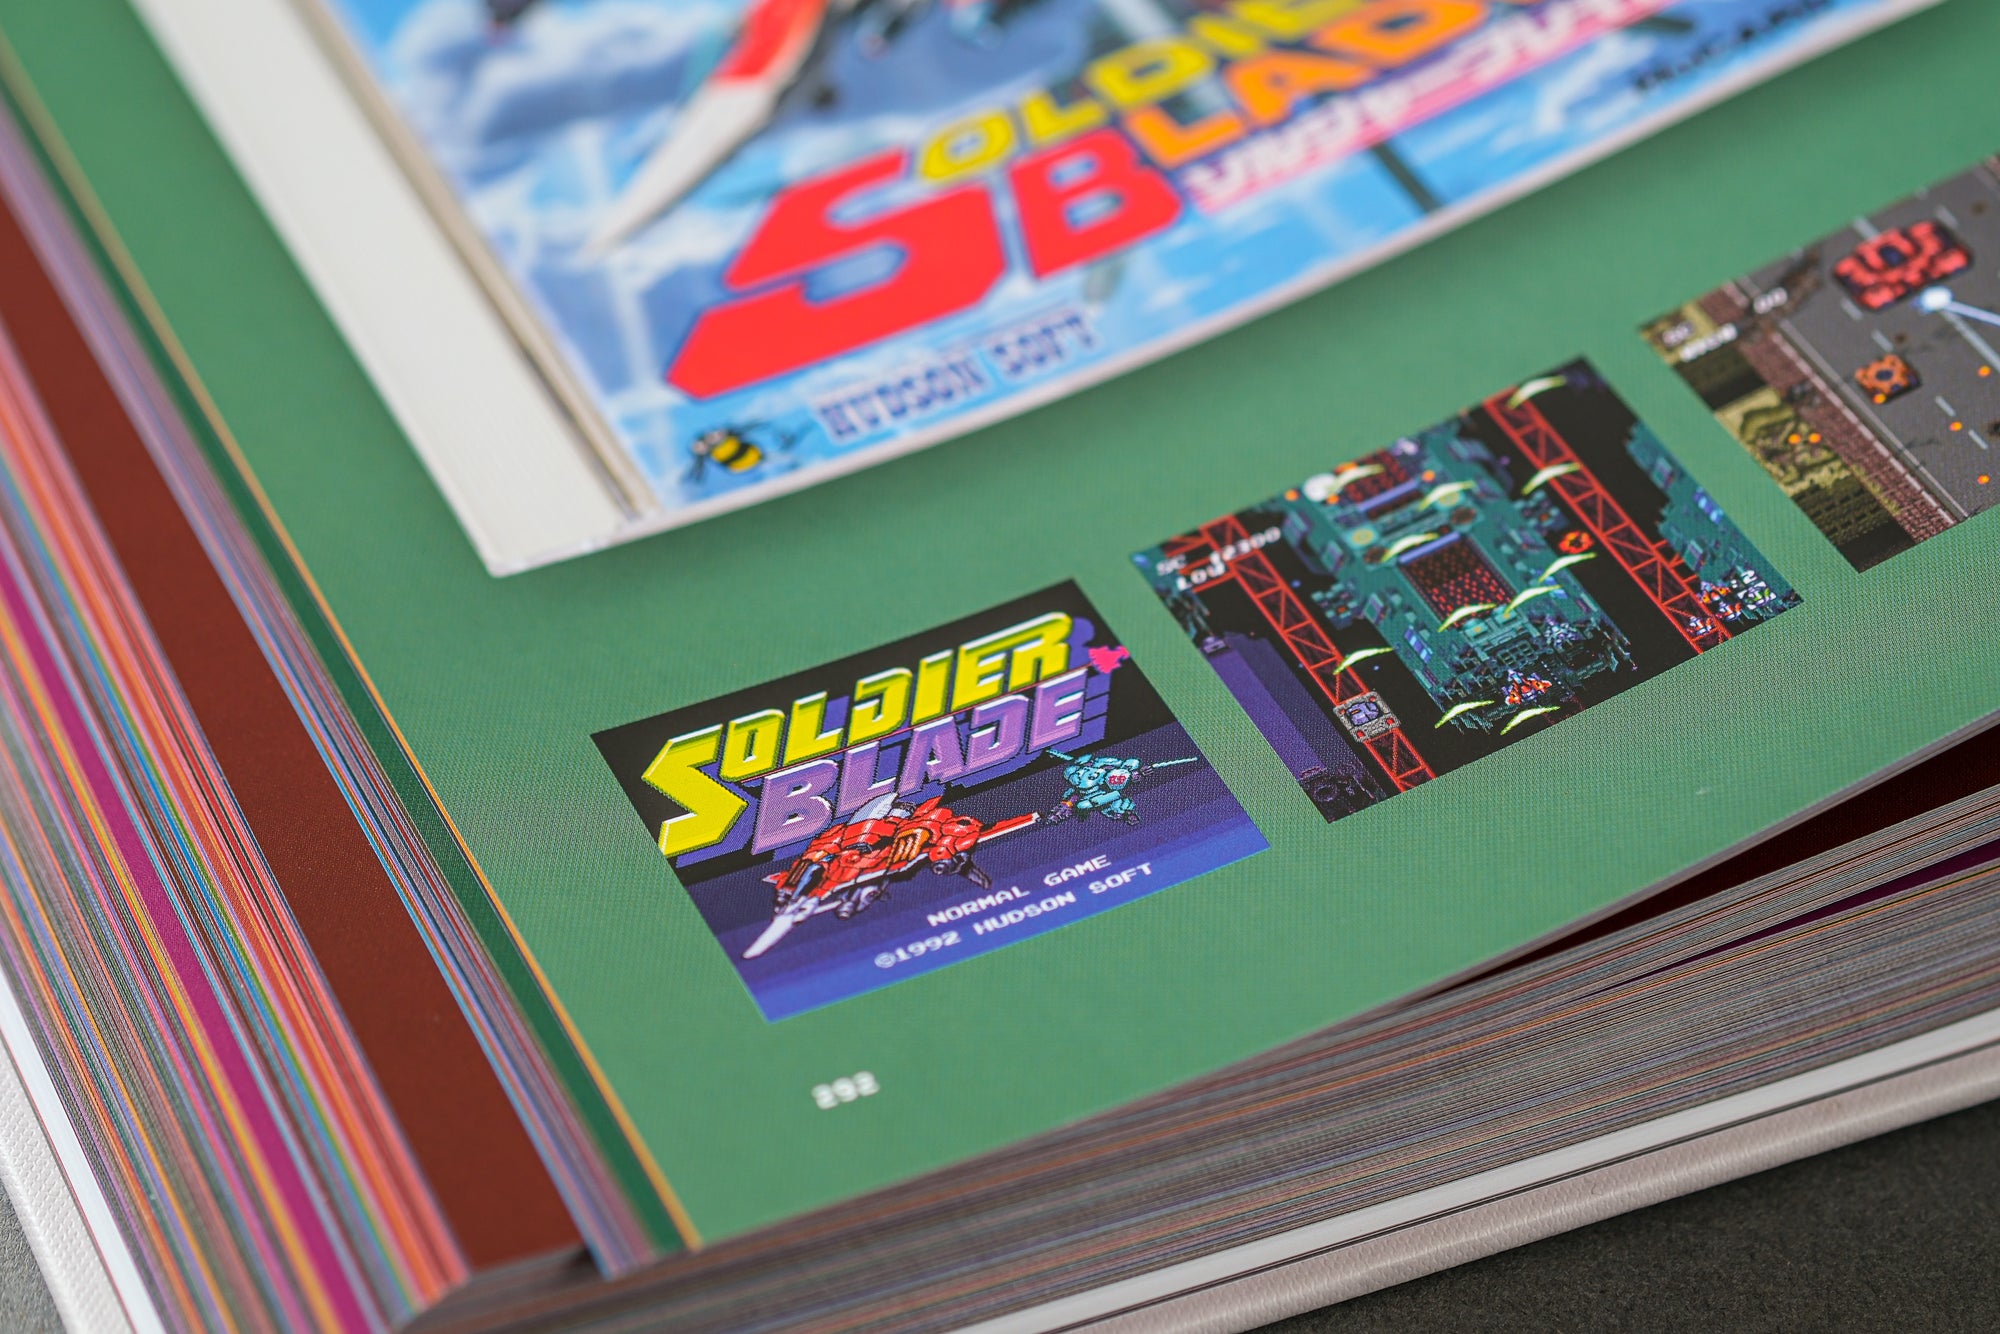 PC Engine: The Box Art Collection